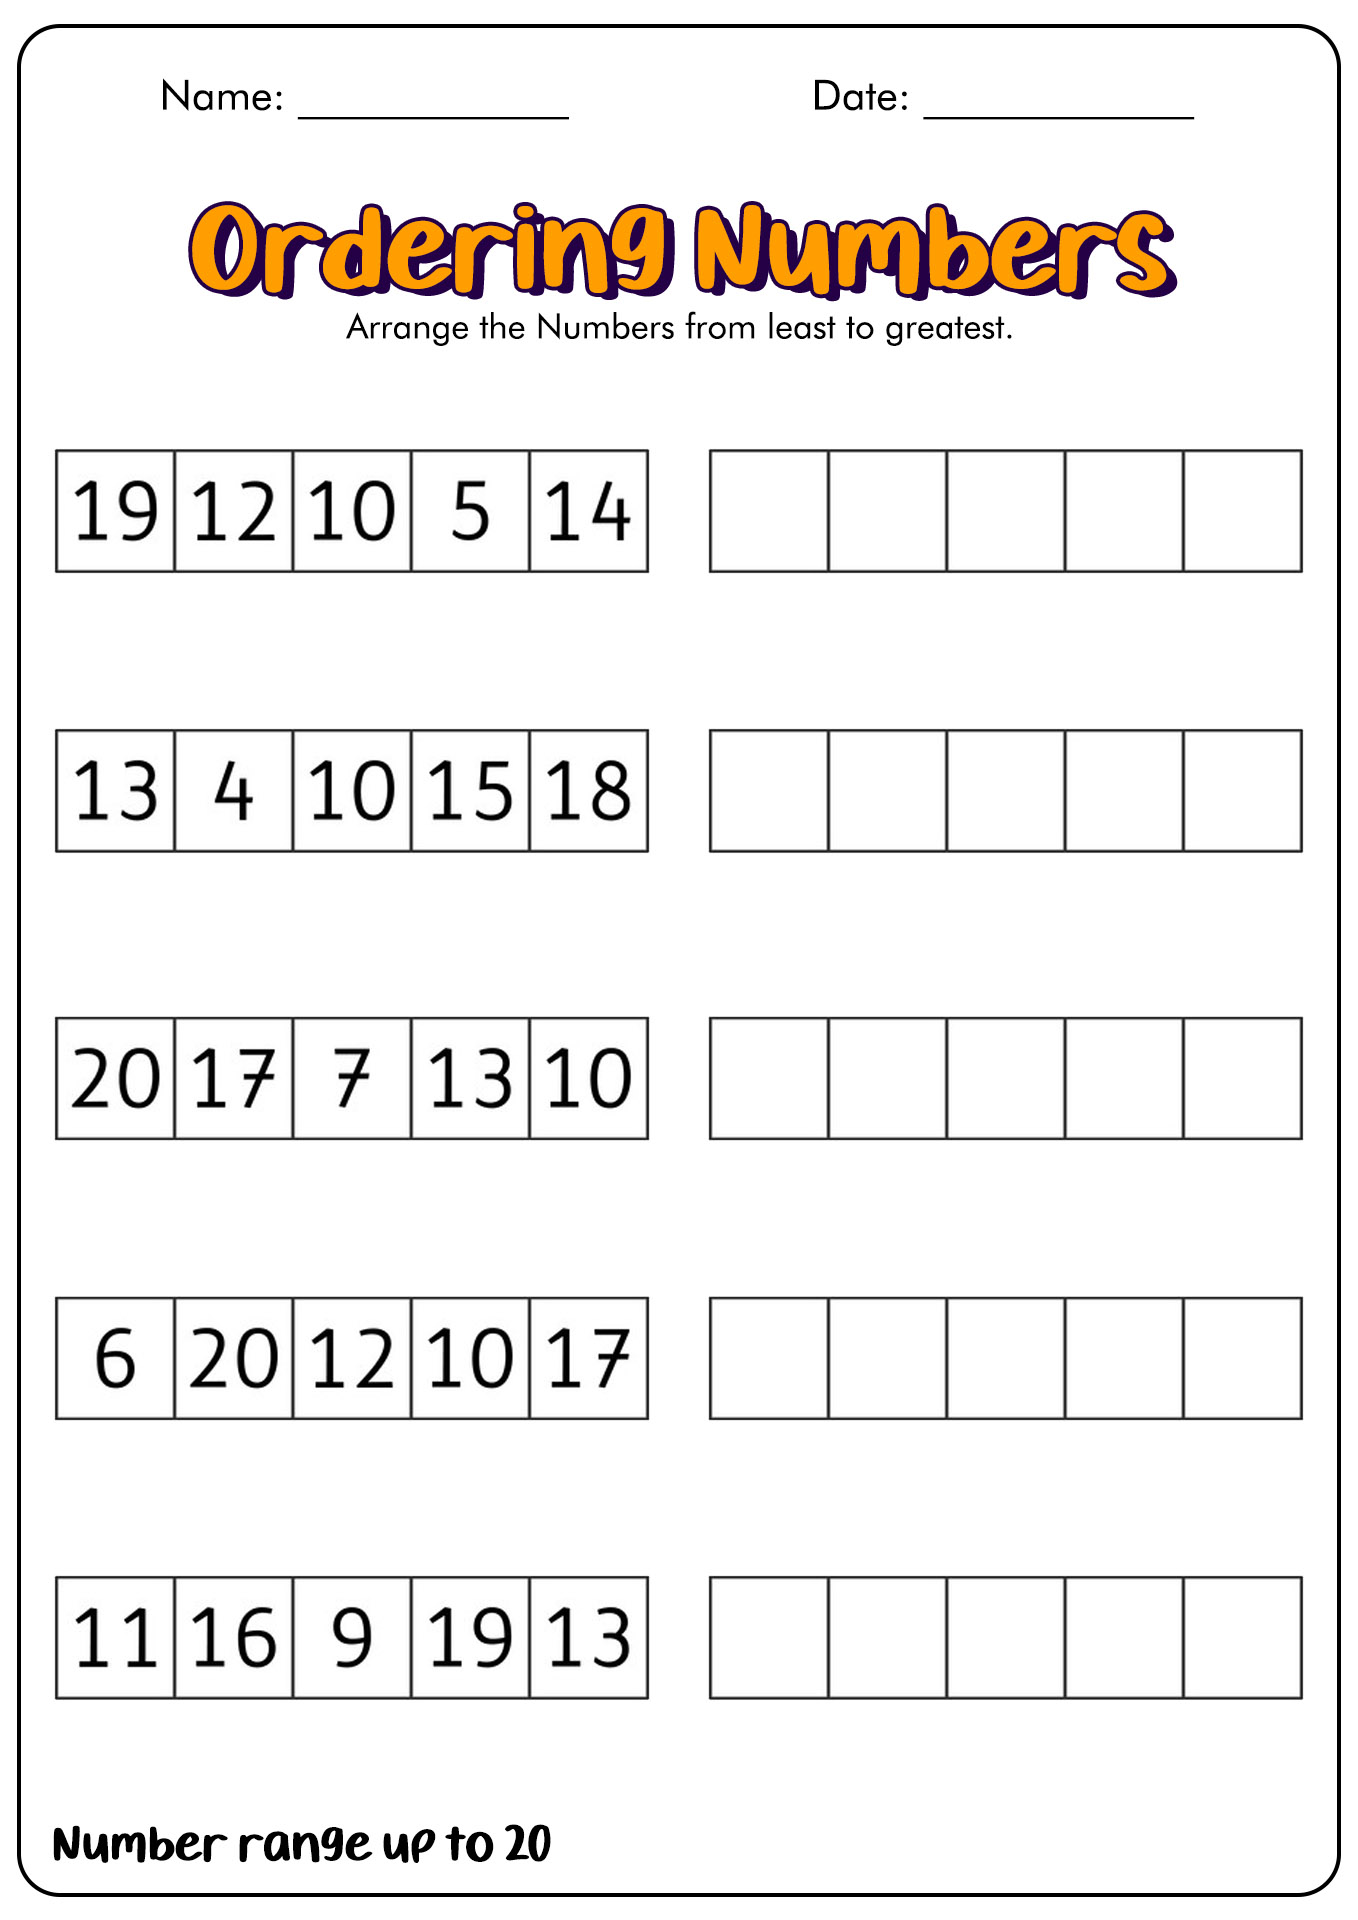 ordering-numbers-1-20-cut-and-paste-activity